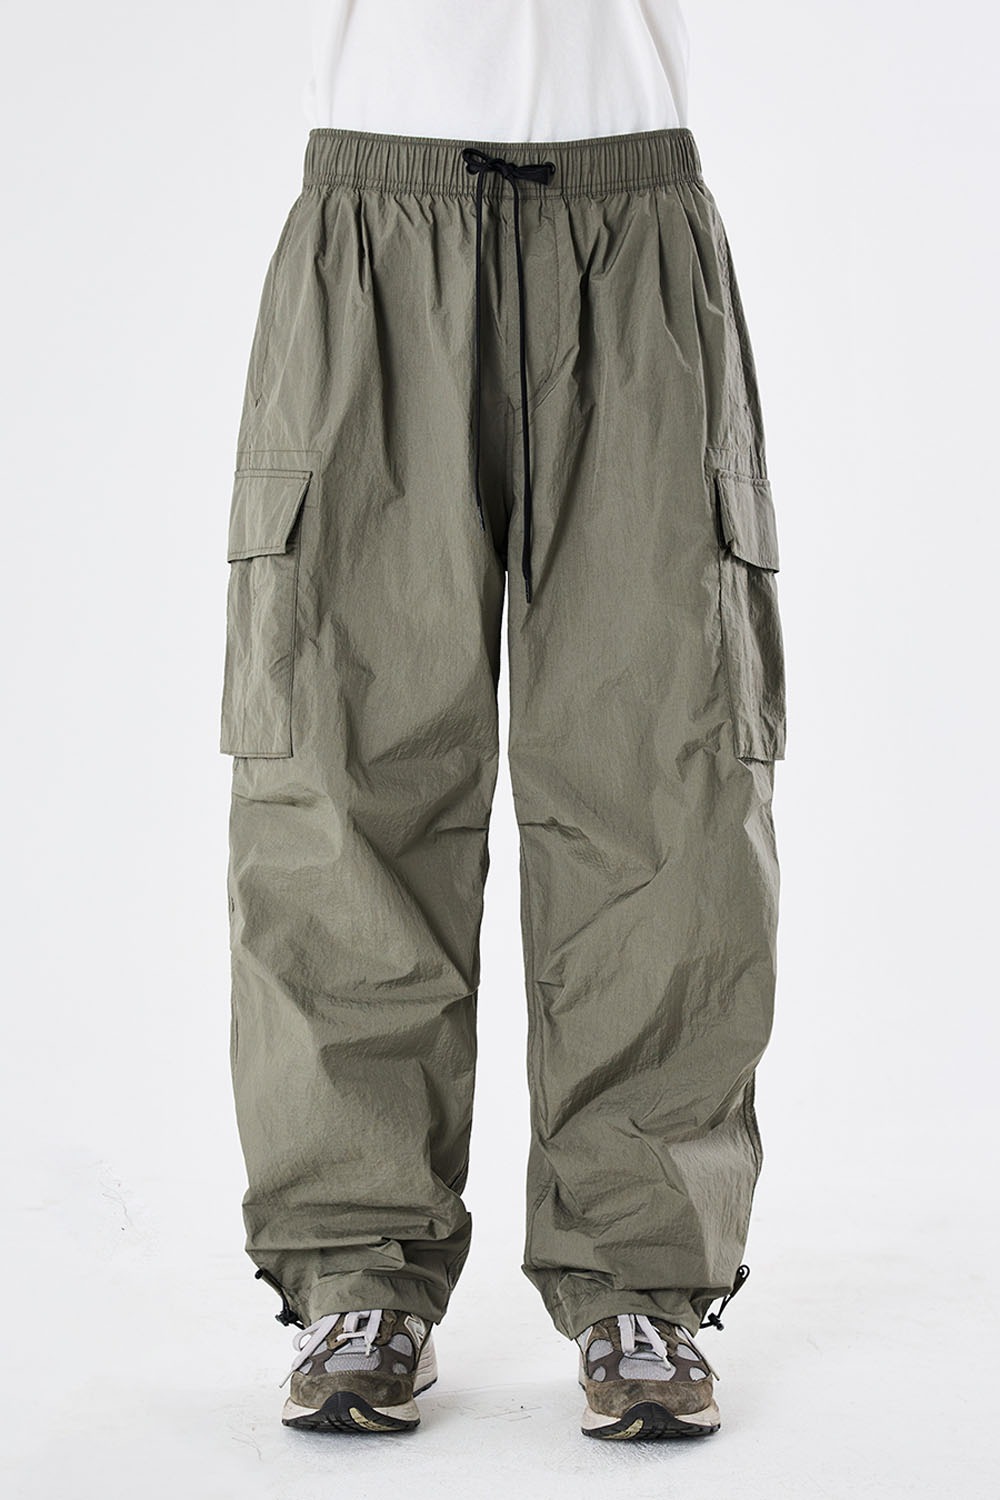 Over Mil 6p Pants-Stone Ripstop